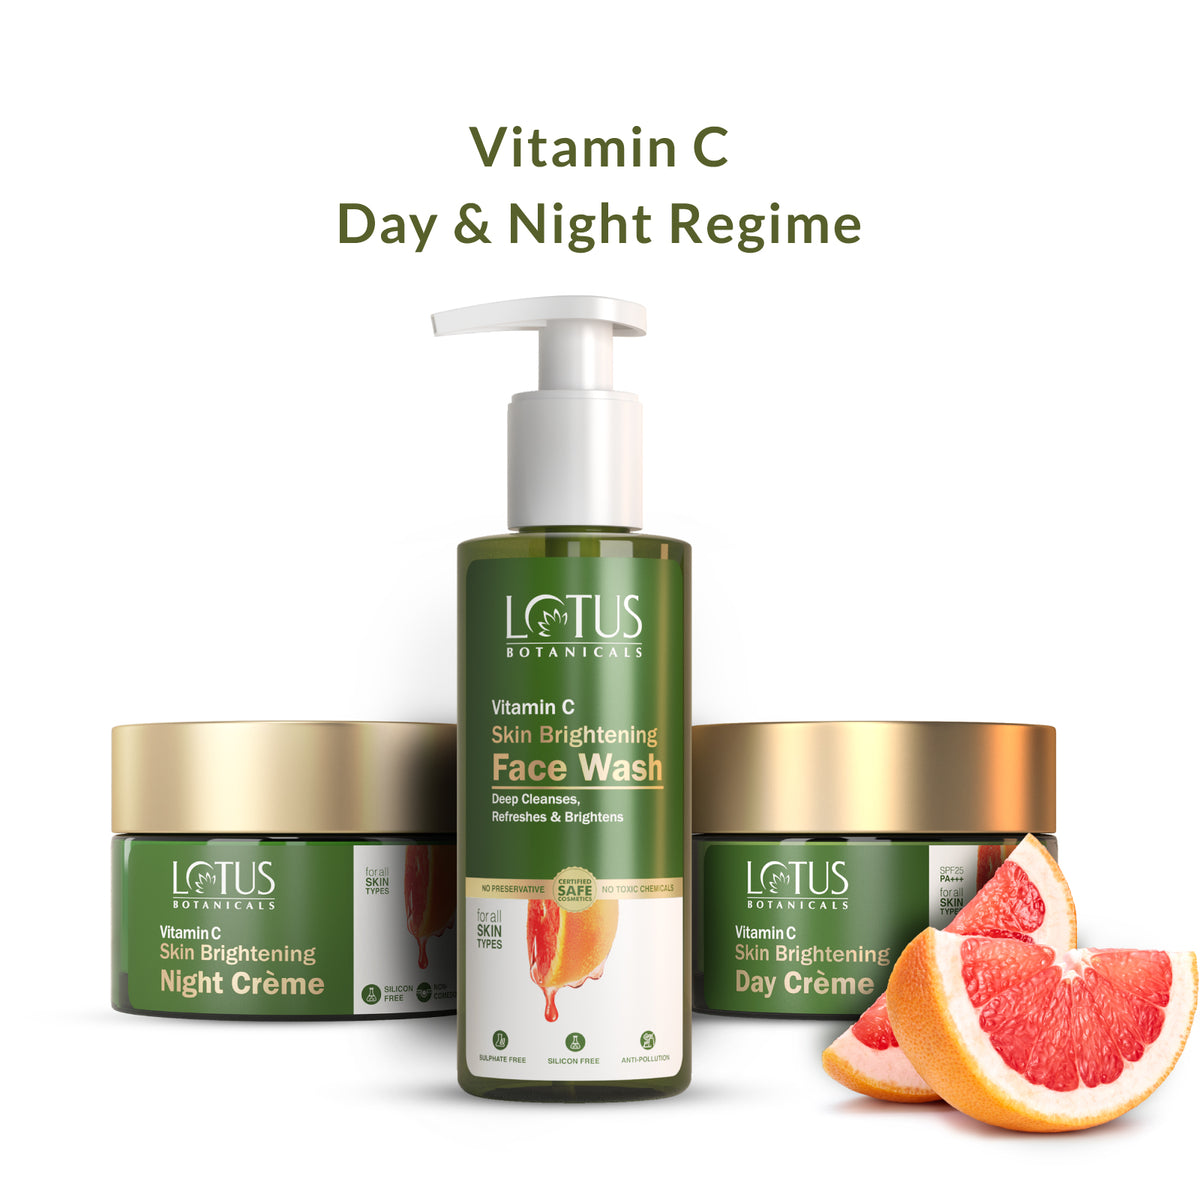 Vitamin C Day & Night Regime - Skincare Products for Brightening and Nourishing your Skin